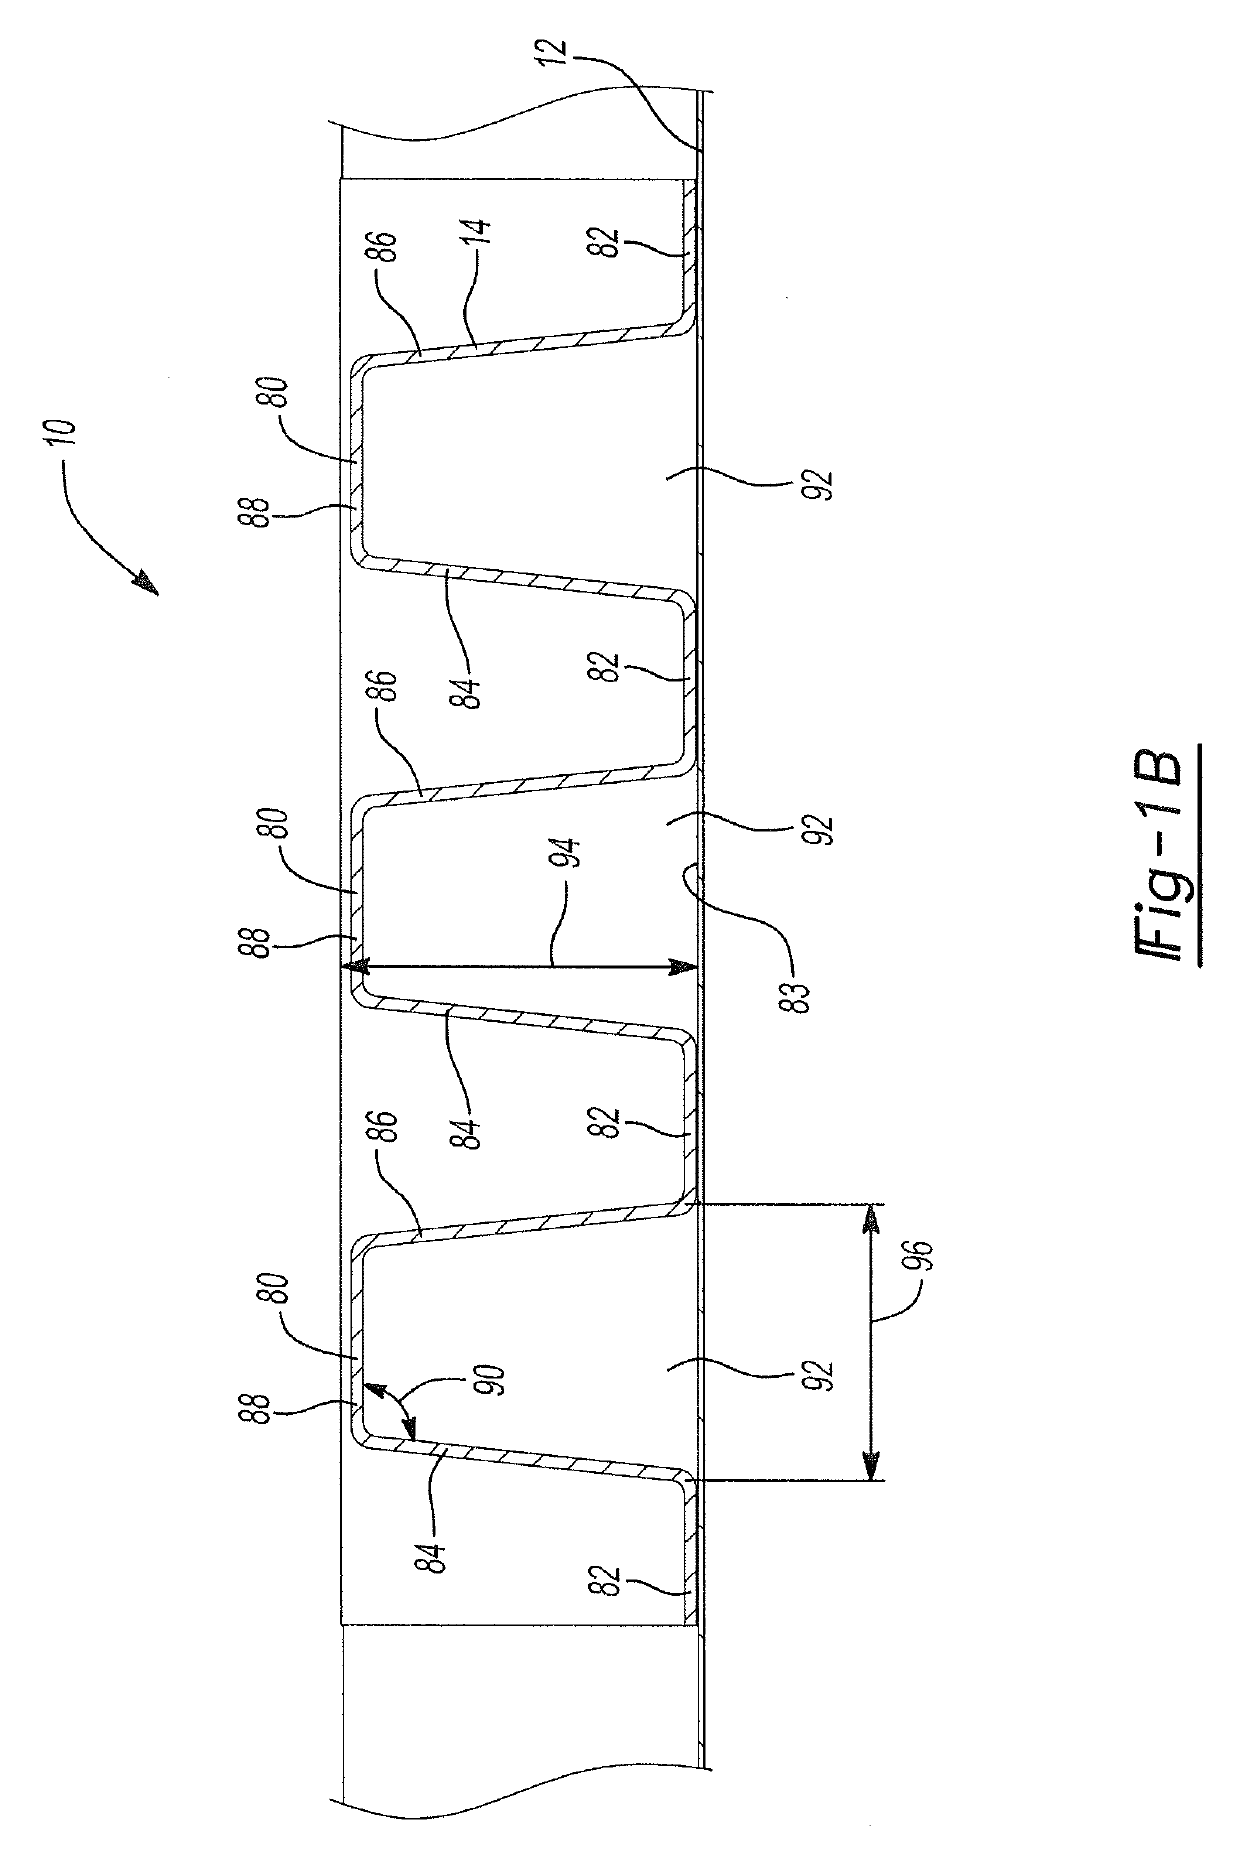 Composite underbody structure for vehicles